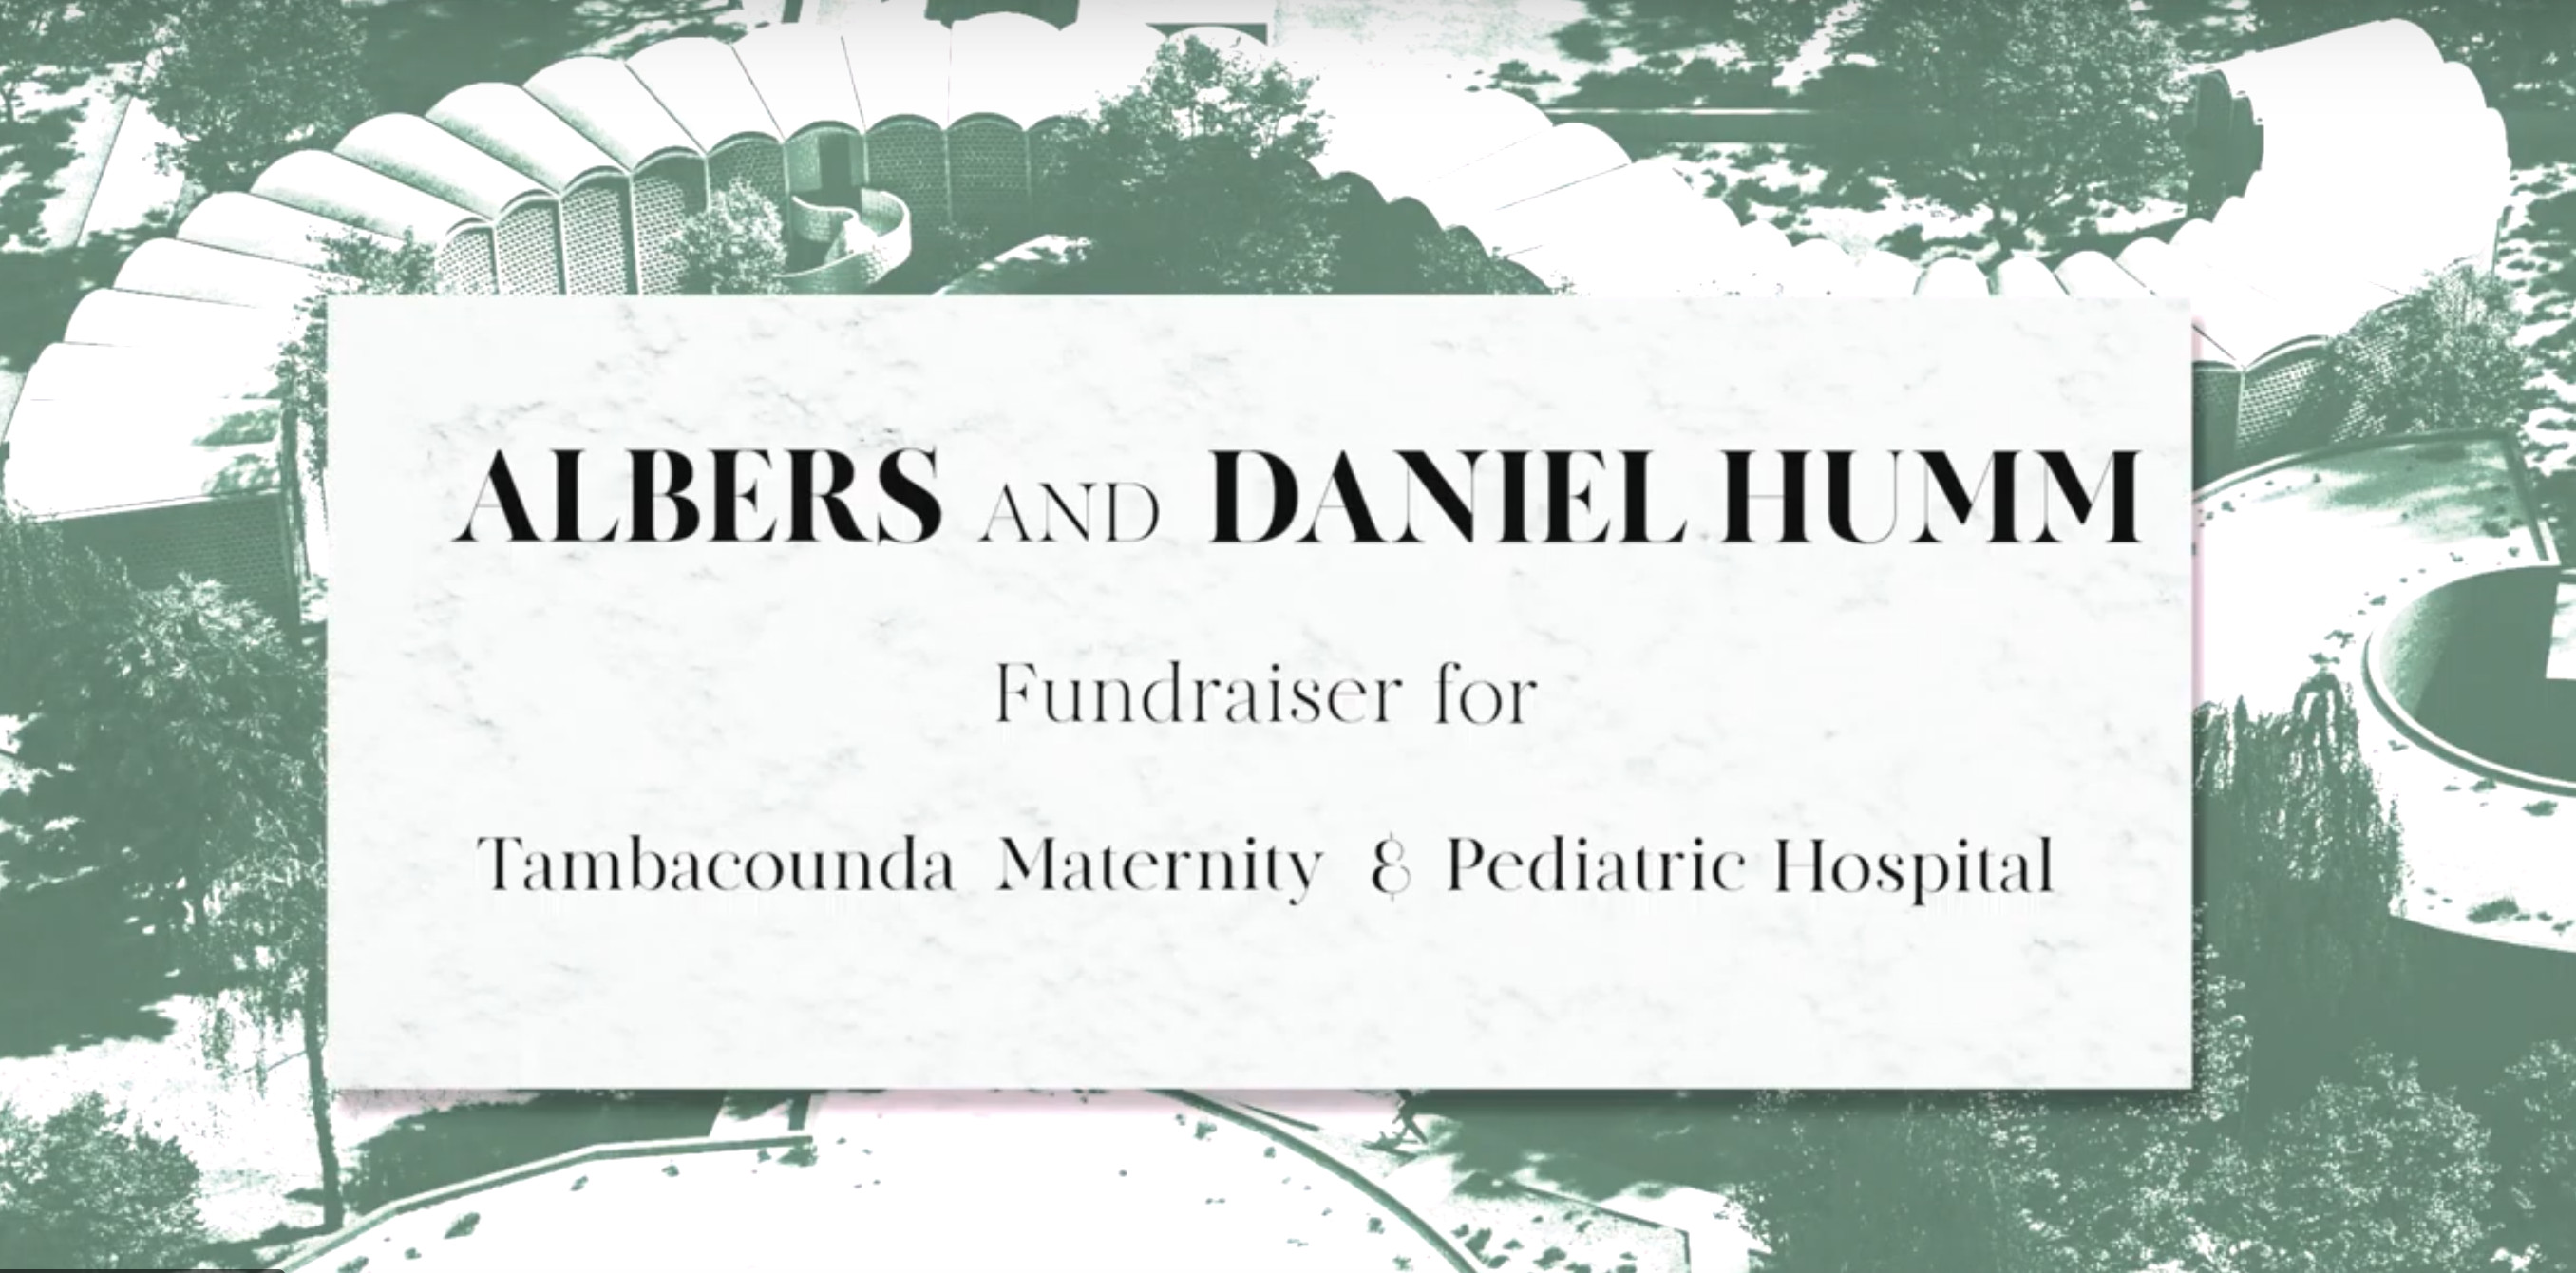 The Albers and Daniel Humm's fundraiser for a Senegalese hospital